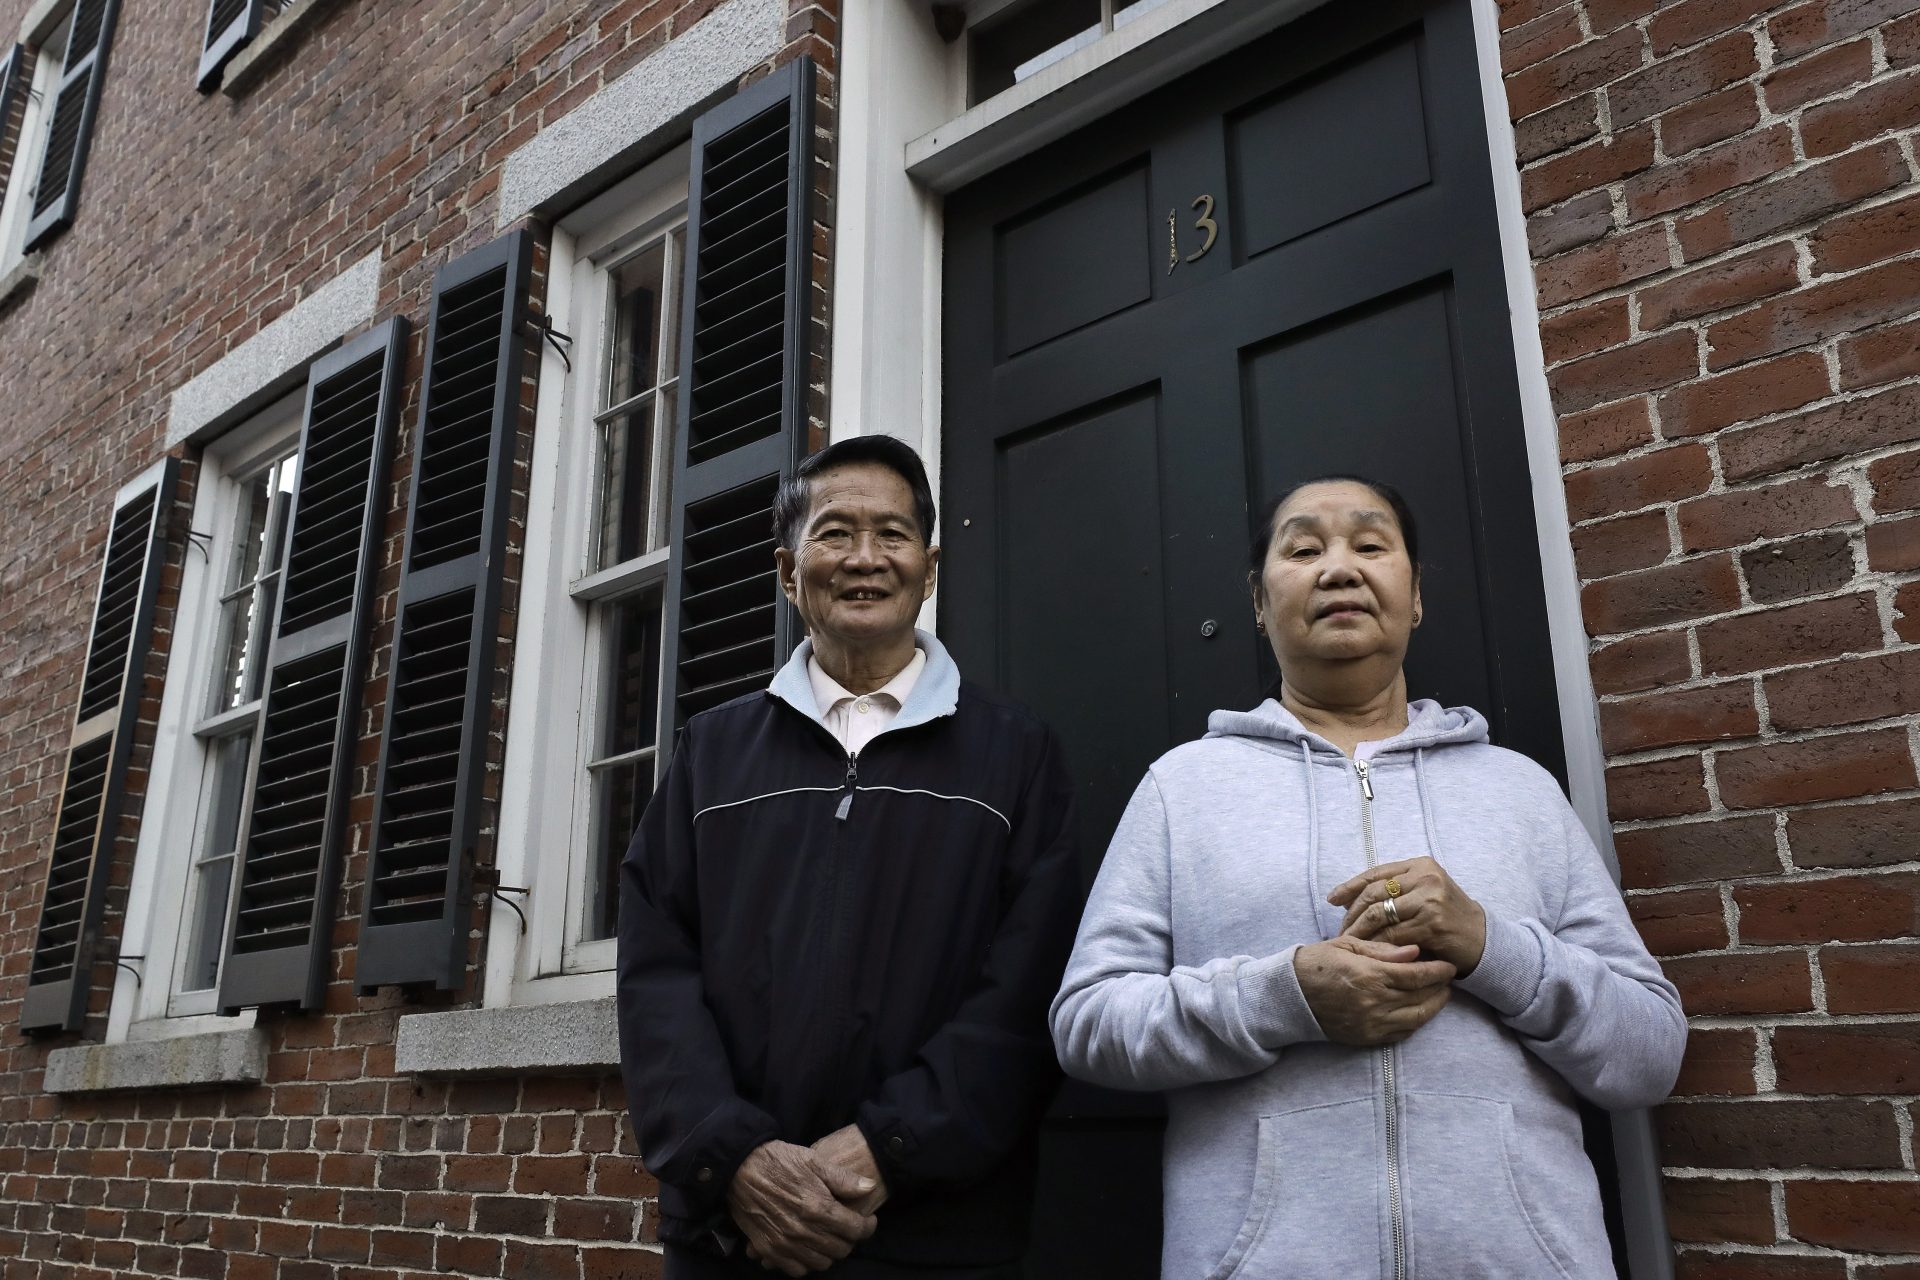 In this Wednesday, May 20, 2020 photo Pay Reh, left, and Poe Meh, right, originally of Burma, also known as Myanmar, stand for a photograph at the entrance to their home, in Lowell, Mass. The elderly couple, who came to Massachusetts as refugees in 2011, were granted a special naturalization oath ceremony in May of 2020 after their lawyer argued that they faced financial hardship if they weren't naturalized immediately.